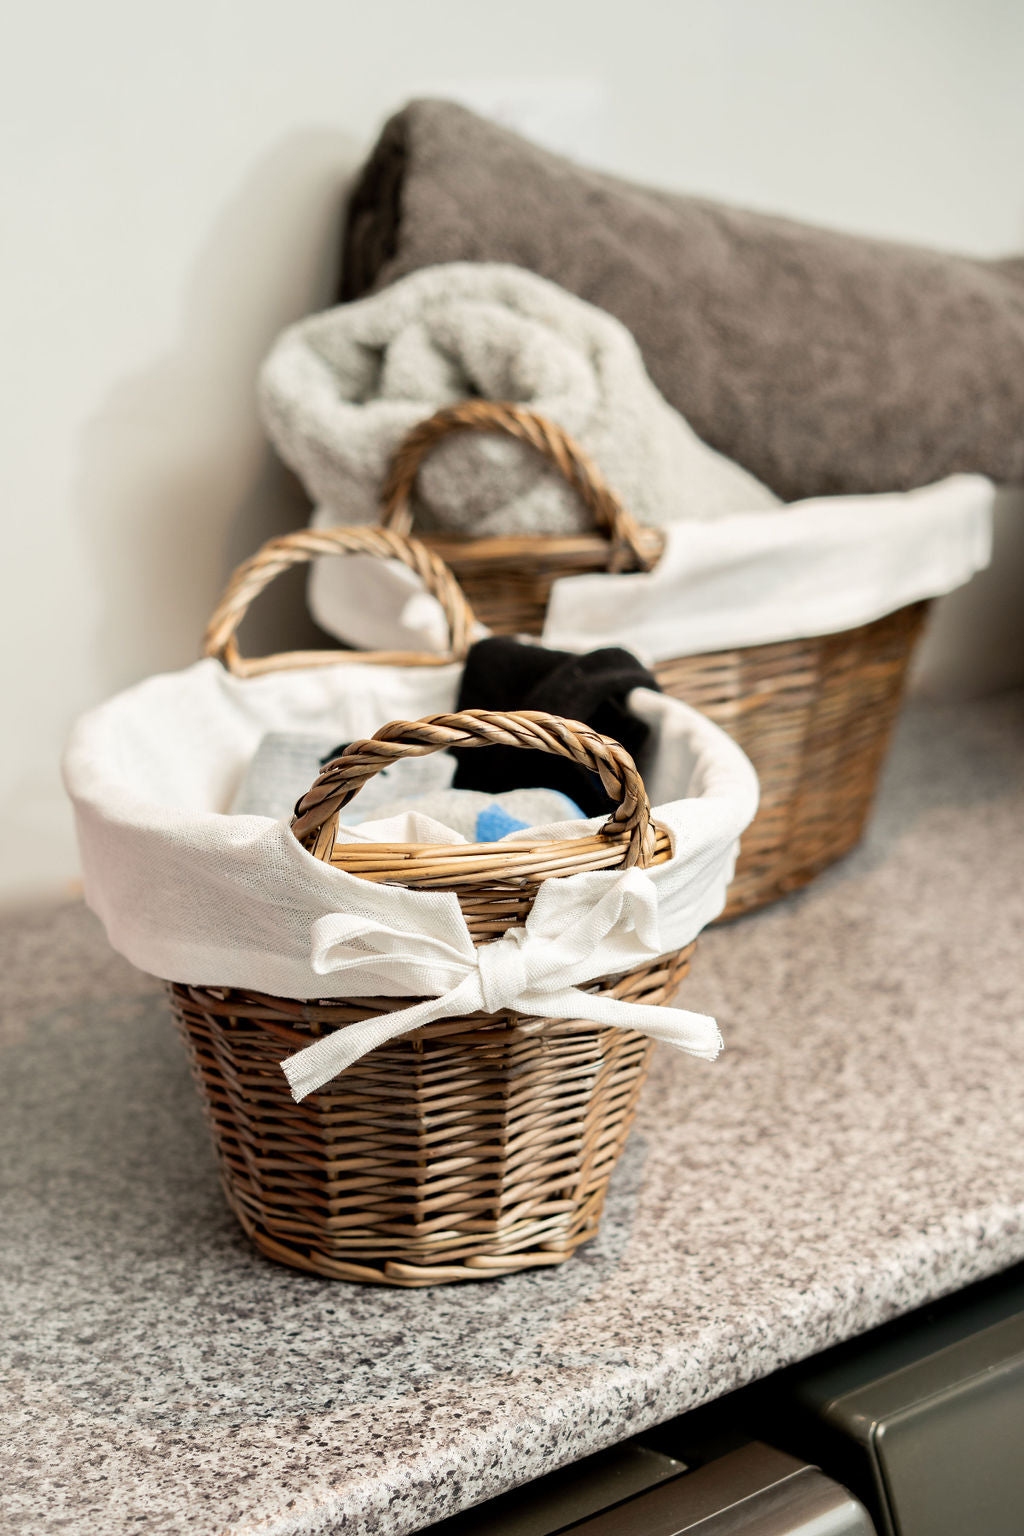 Light Grey Wicker Oval Basket with Removable Lining